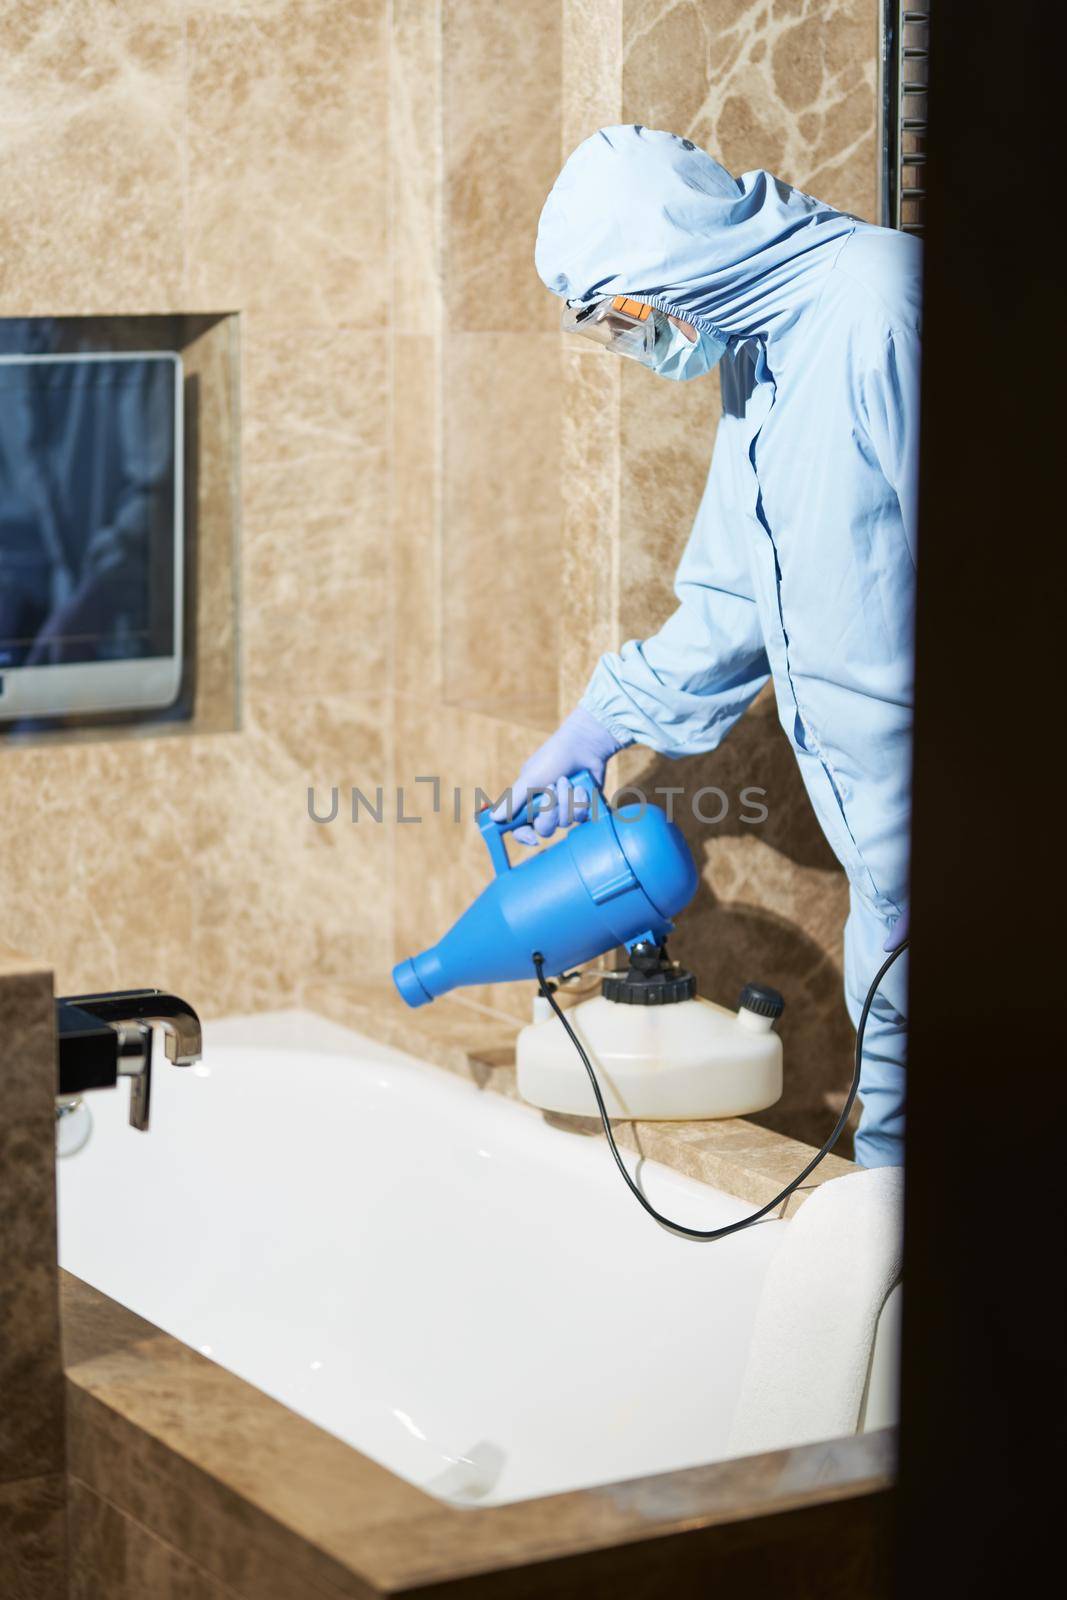 Cropped photo of worker in protective overalls and mask using chemicals disinfecting in hotel bathroom. Coronavirus and quarantine concept